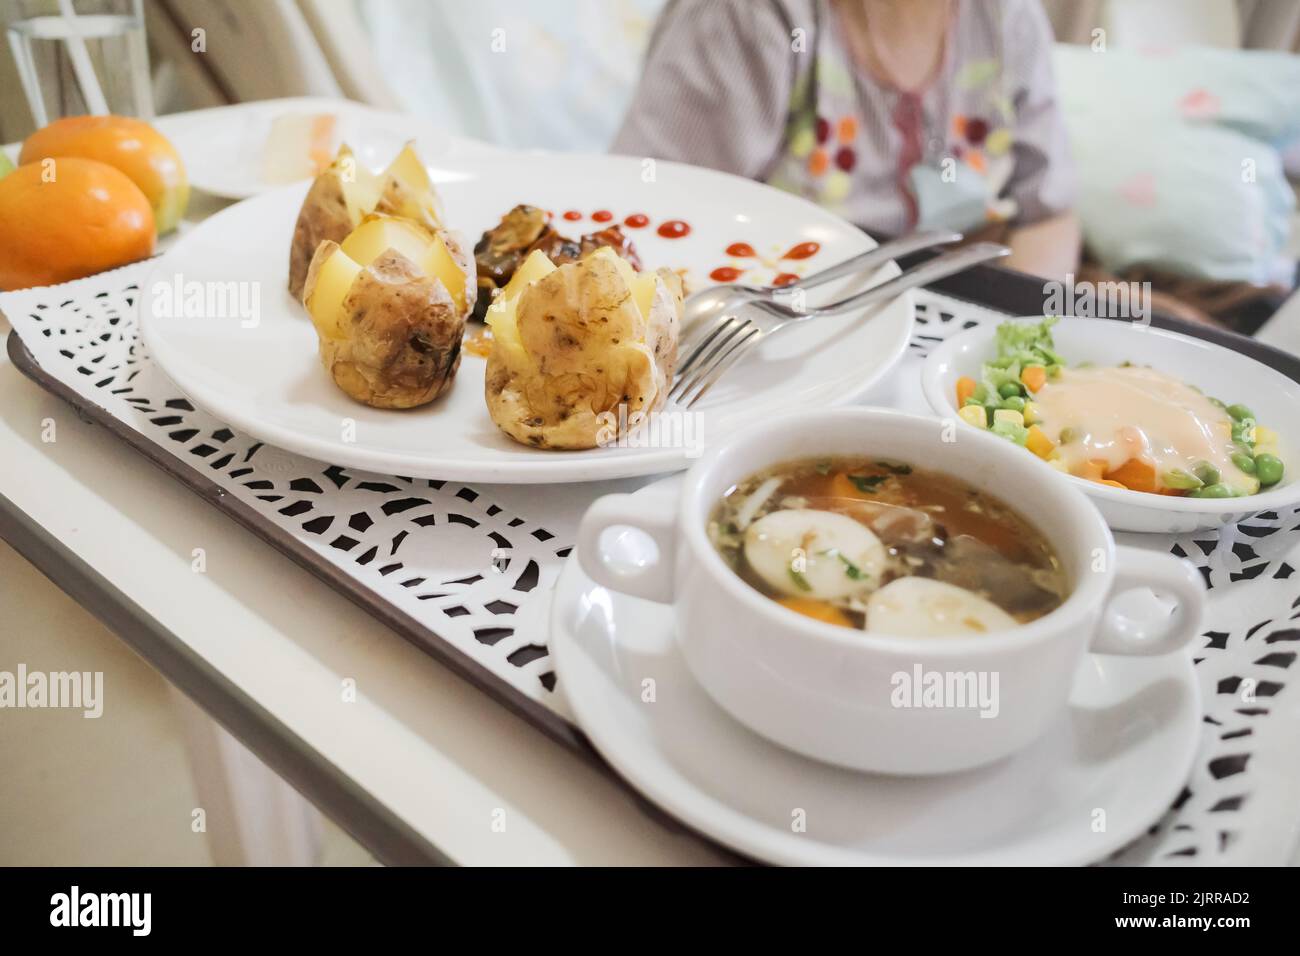 Female patient sitting on hospital bed having lack of appetite regardless varied and delicious meal on the table Stock Photo